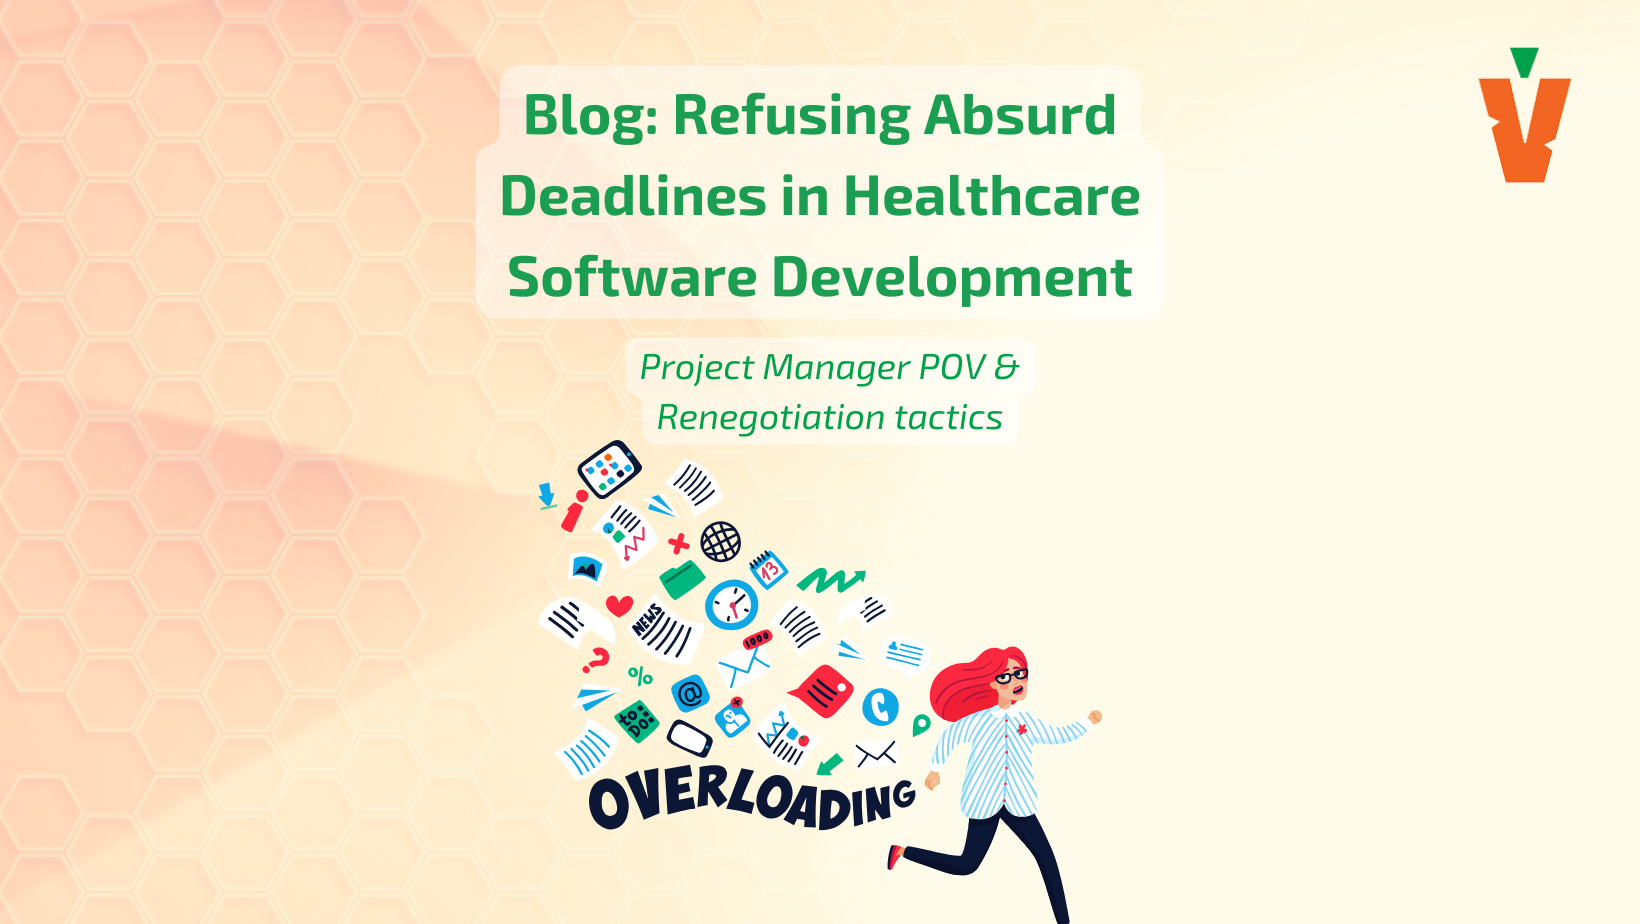 Project Manager POV: Refusing an Absurd Deadline in Healthcare SaaS